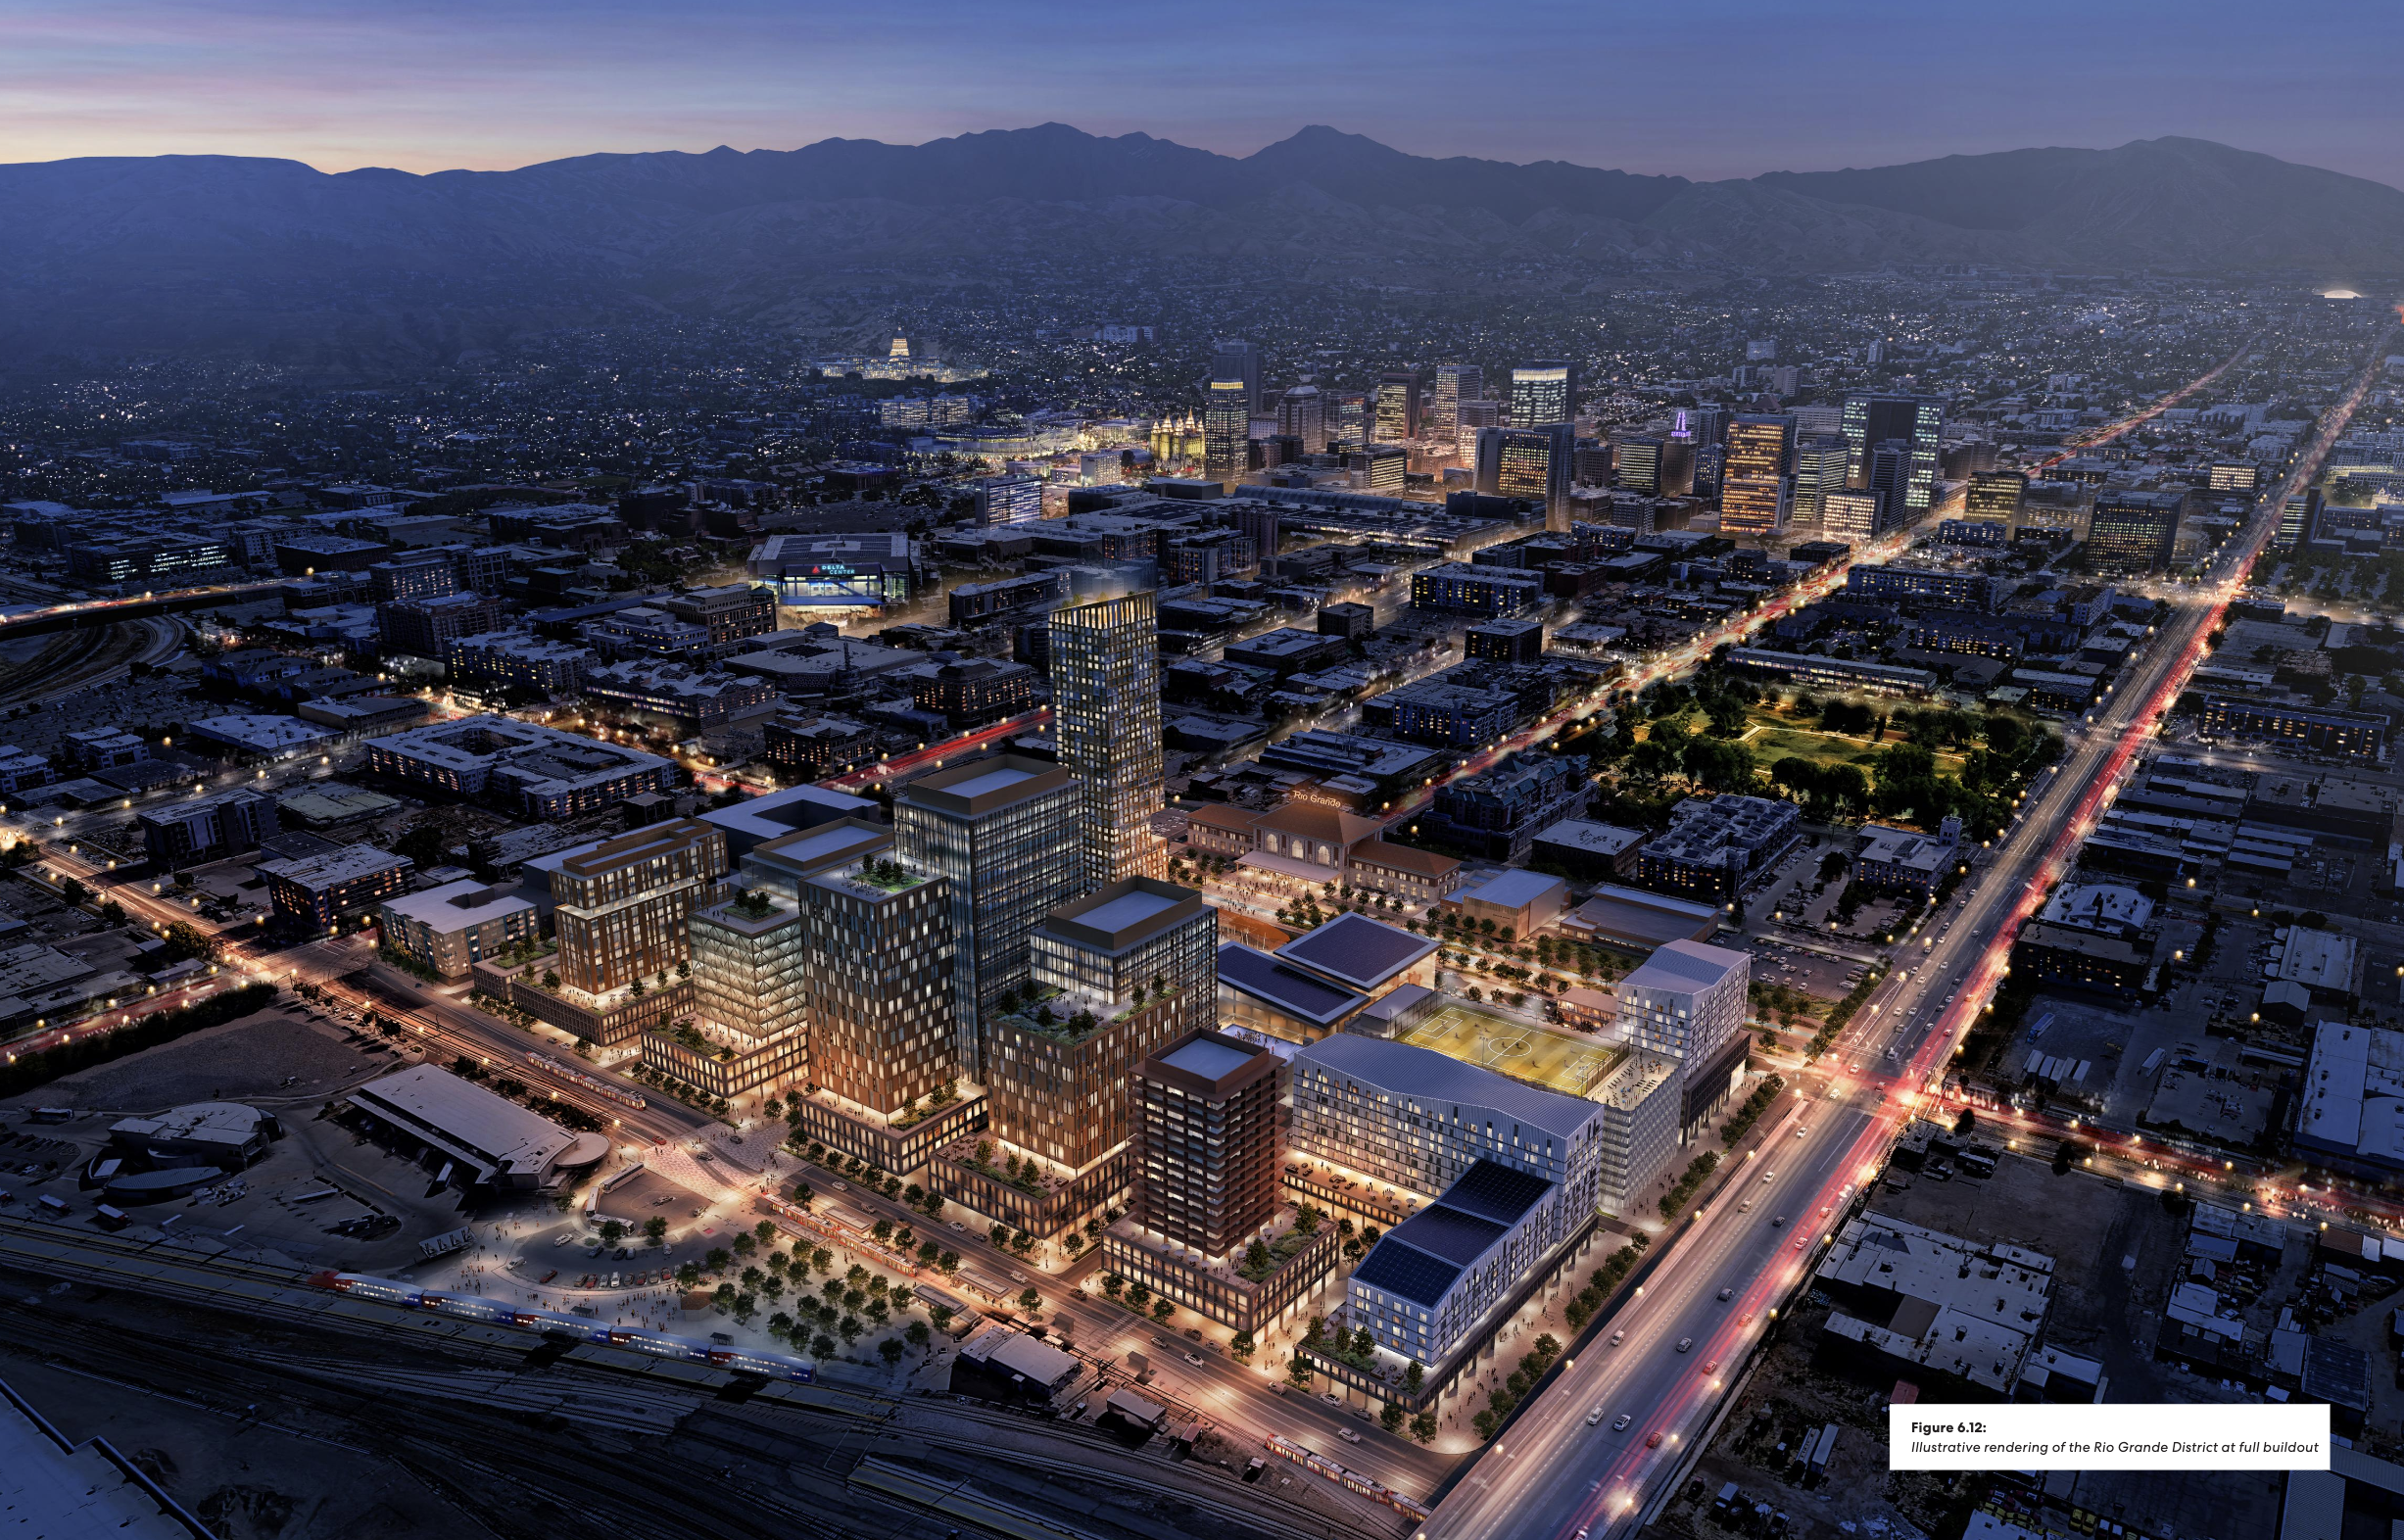 A rendering of the Rio Grande District under proposed redevelopment plans. - SALT LAKE CITY RDA